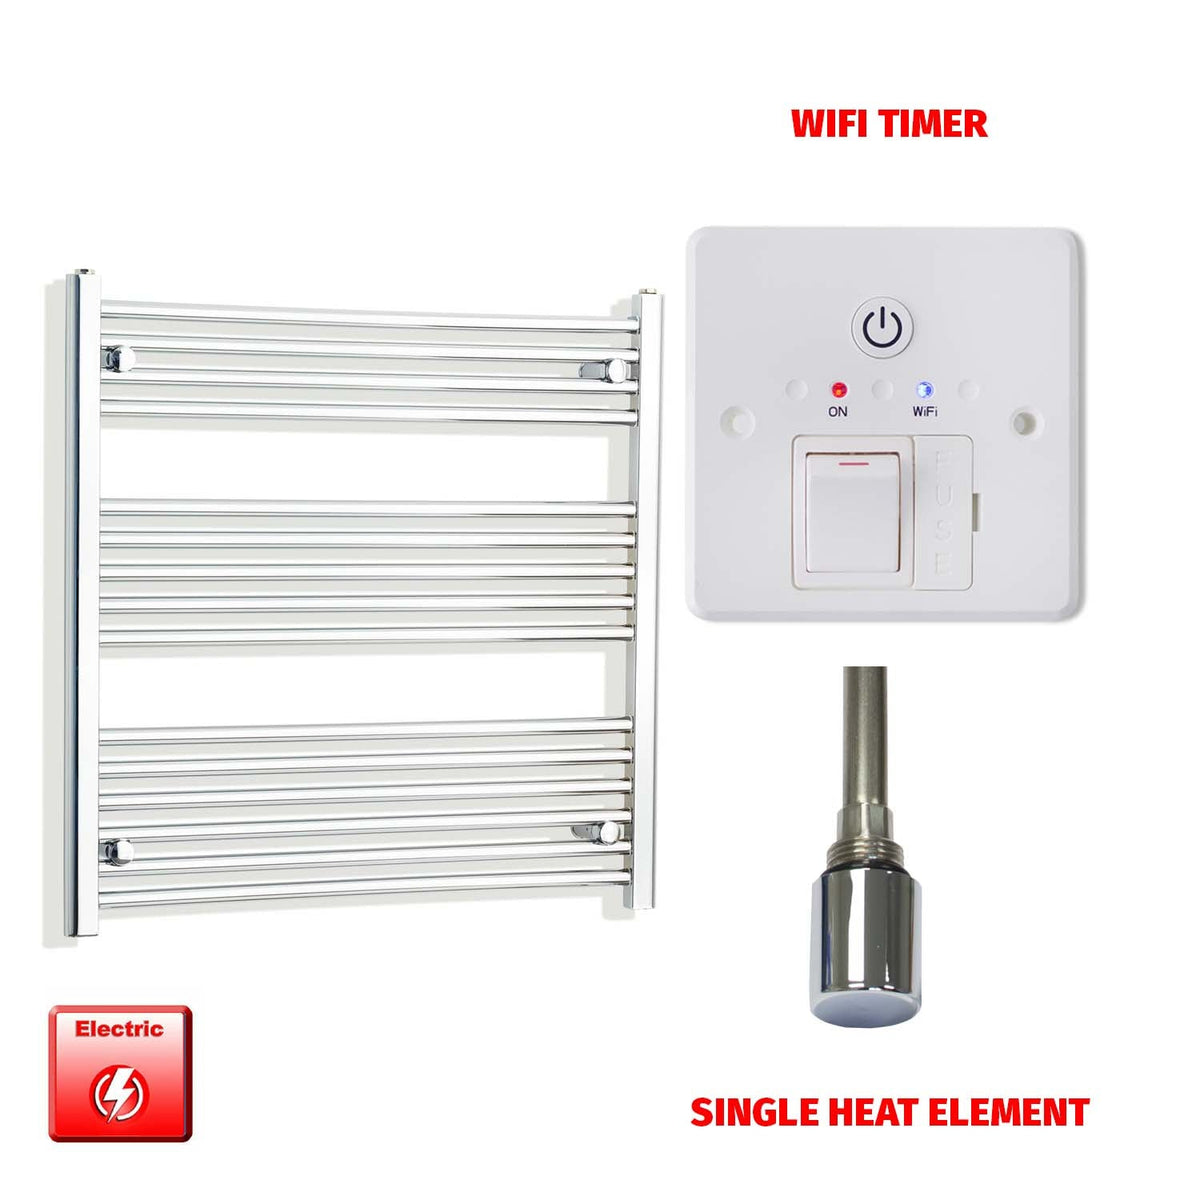 800mm High 800mm Wide Pre-Filled Electric Heated Towel Rail Radiator Straight Chrome Single heat element Wifi timer